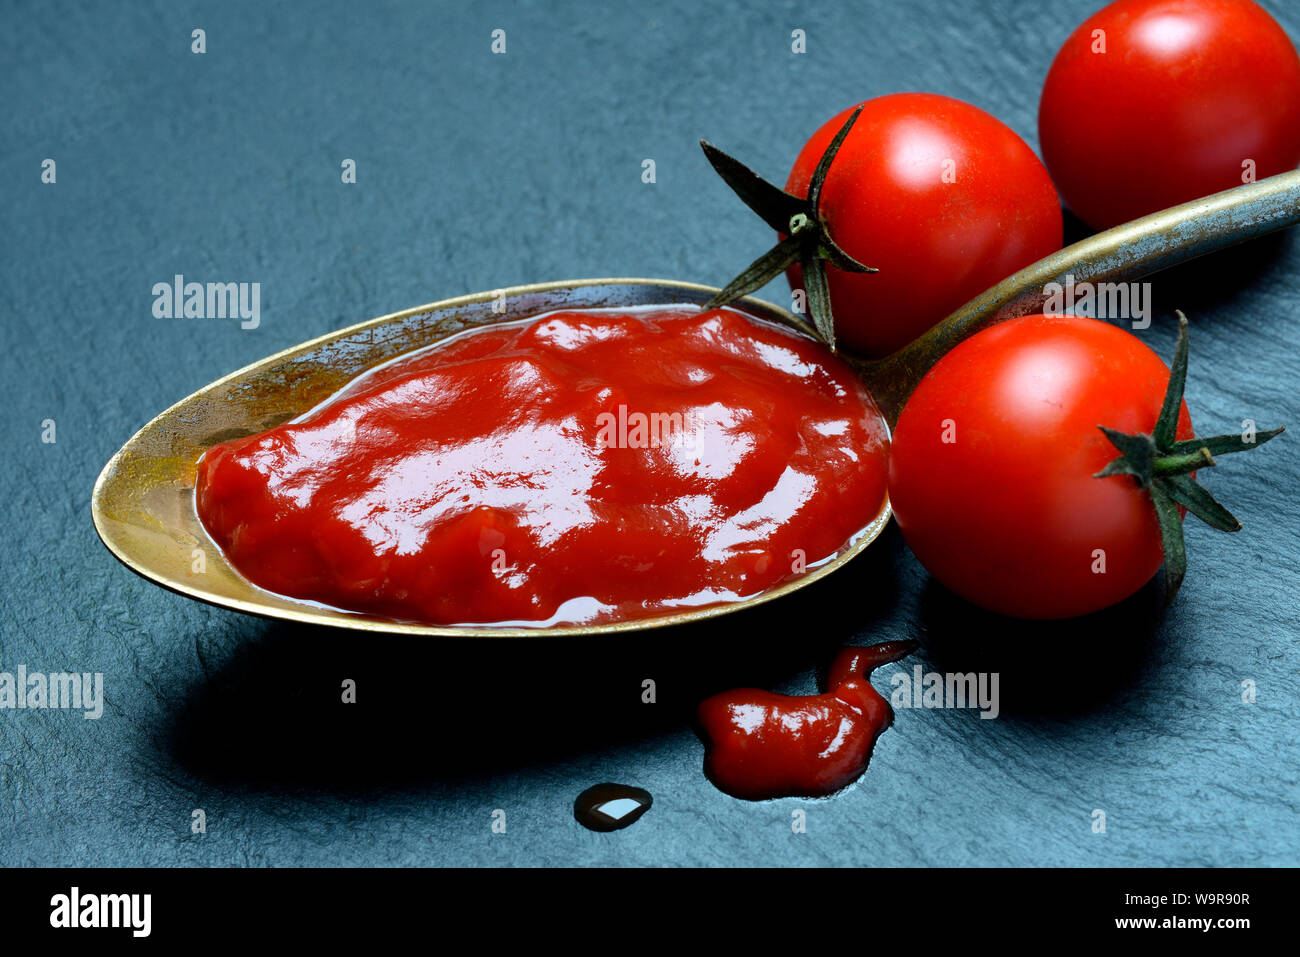 tomato ketchup in spoon, tomatoes Stock Photo